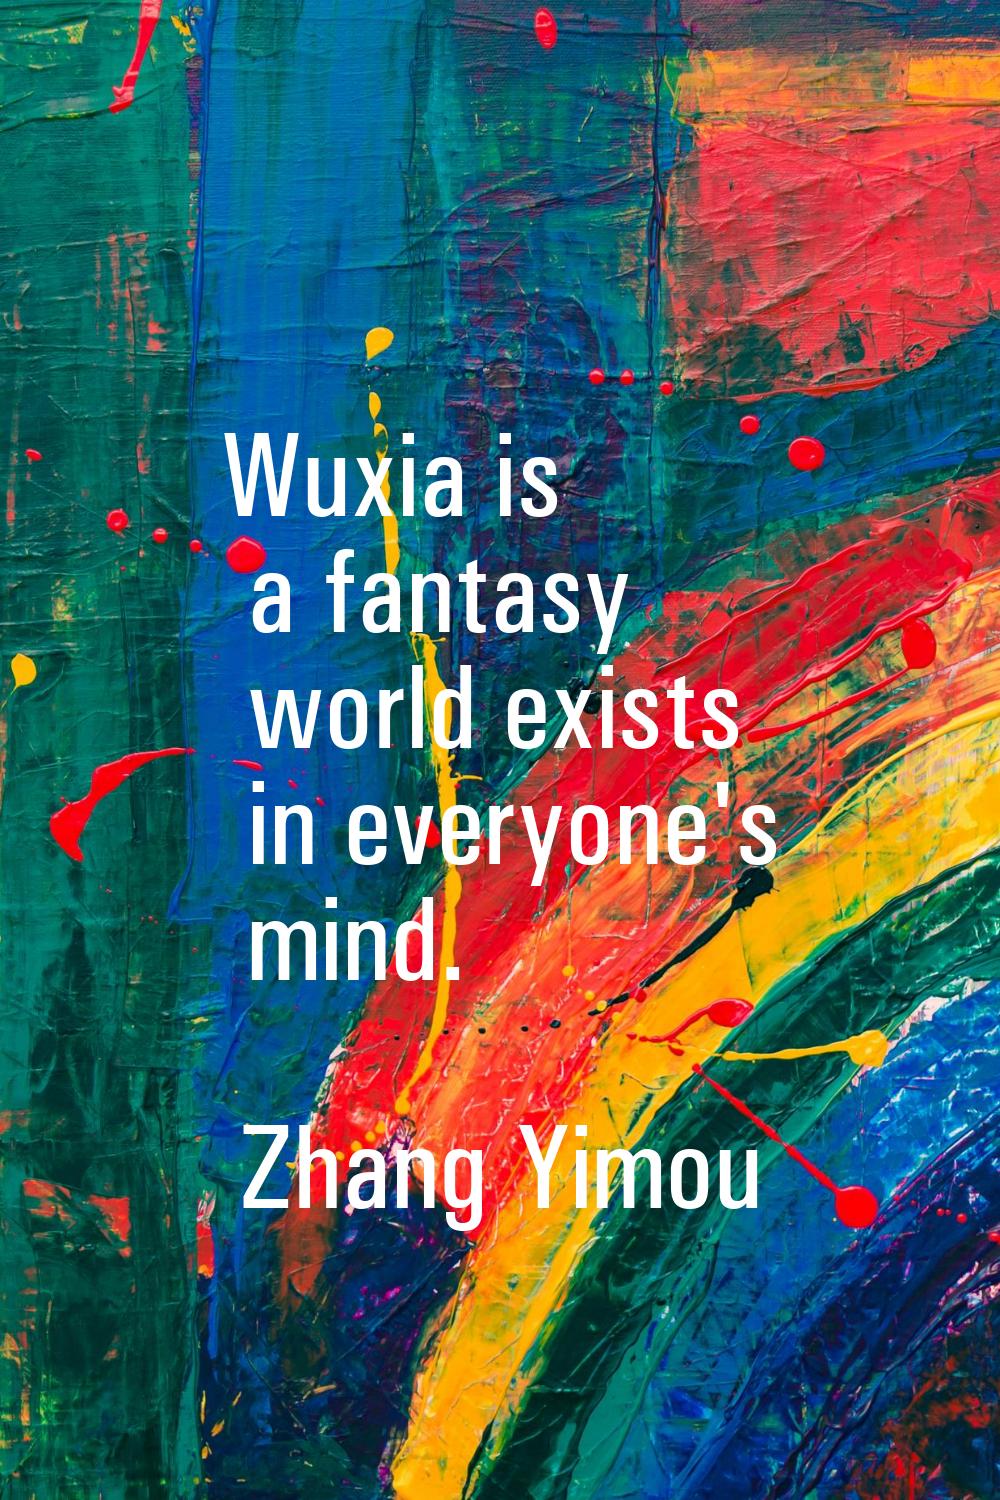 Wuxia is a fantasy world exists in everyone's mind.